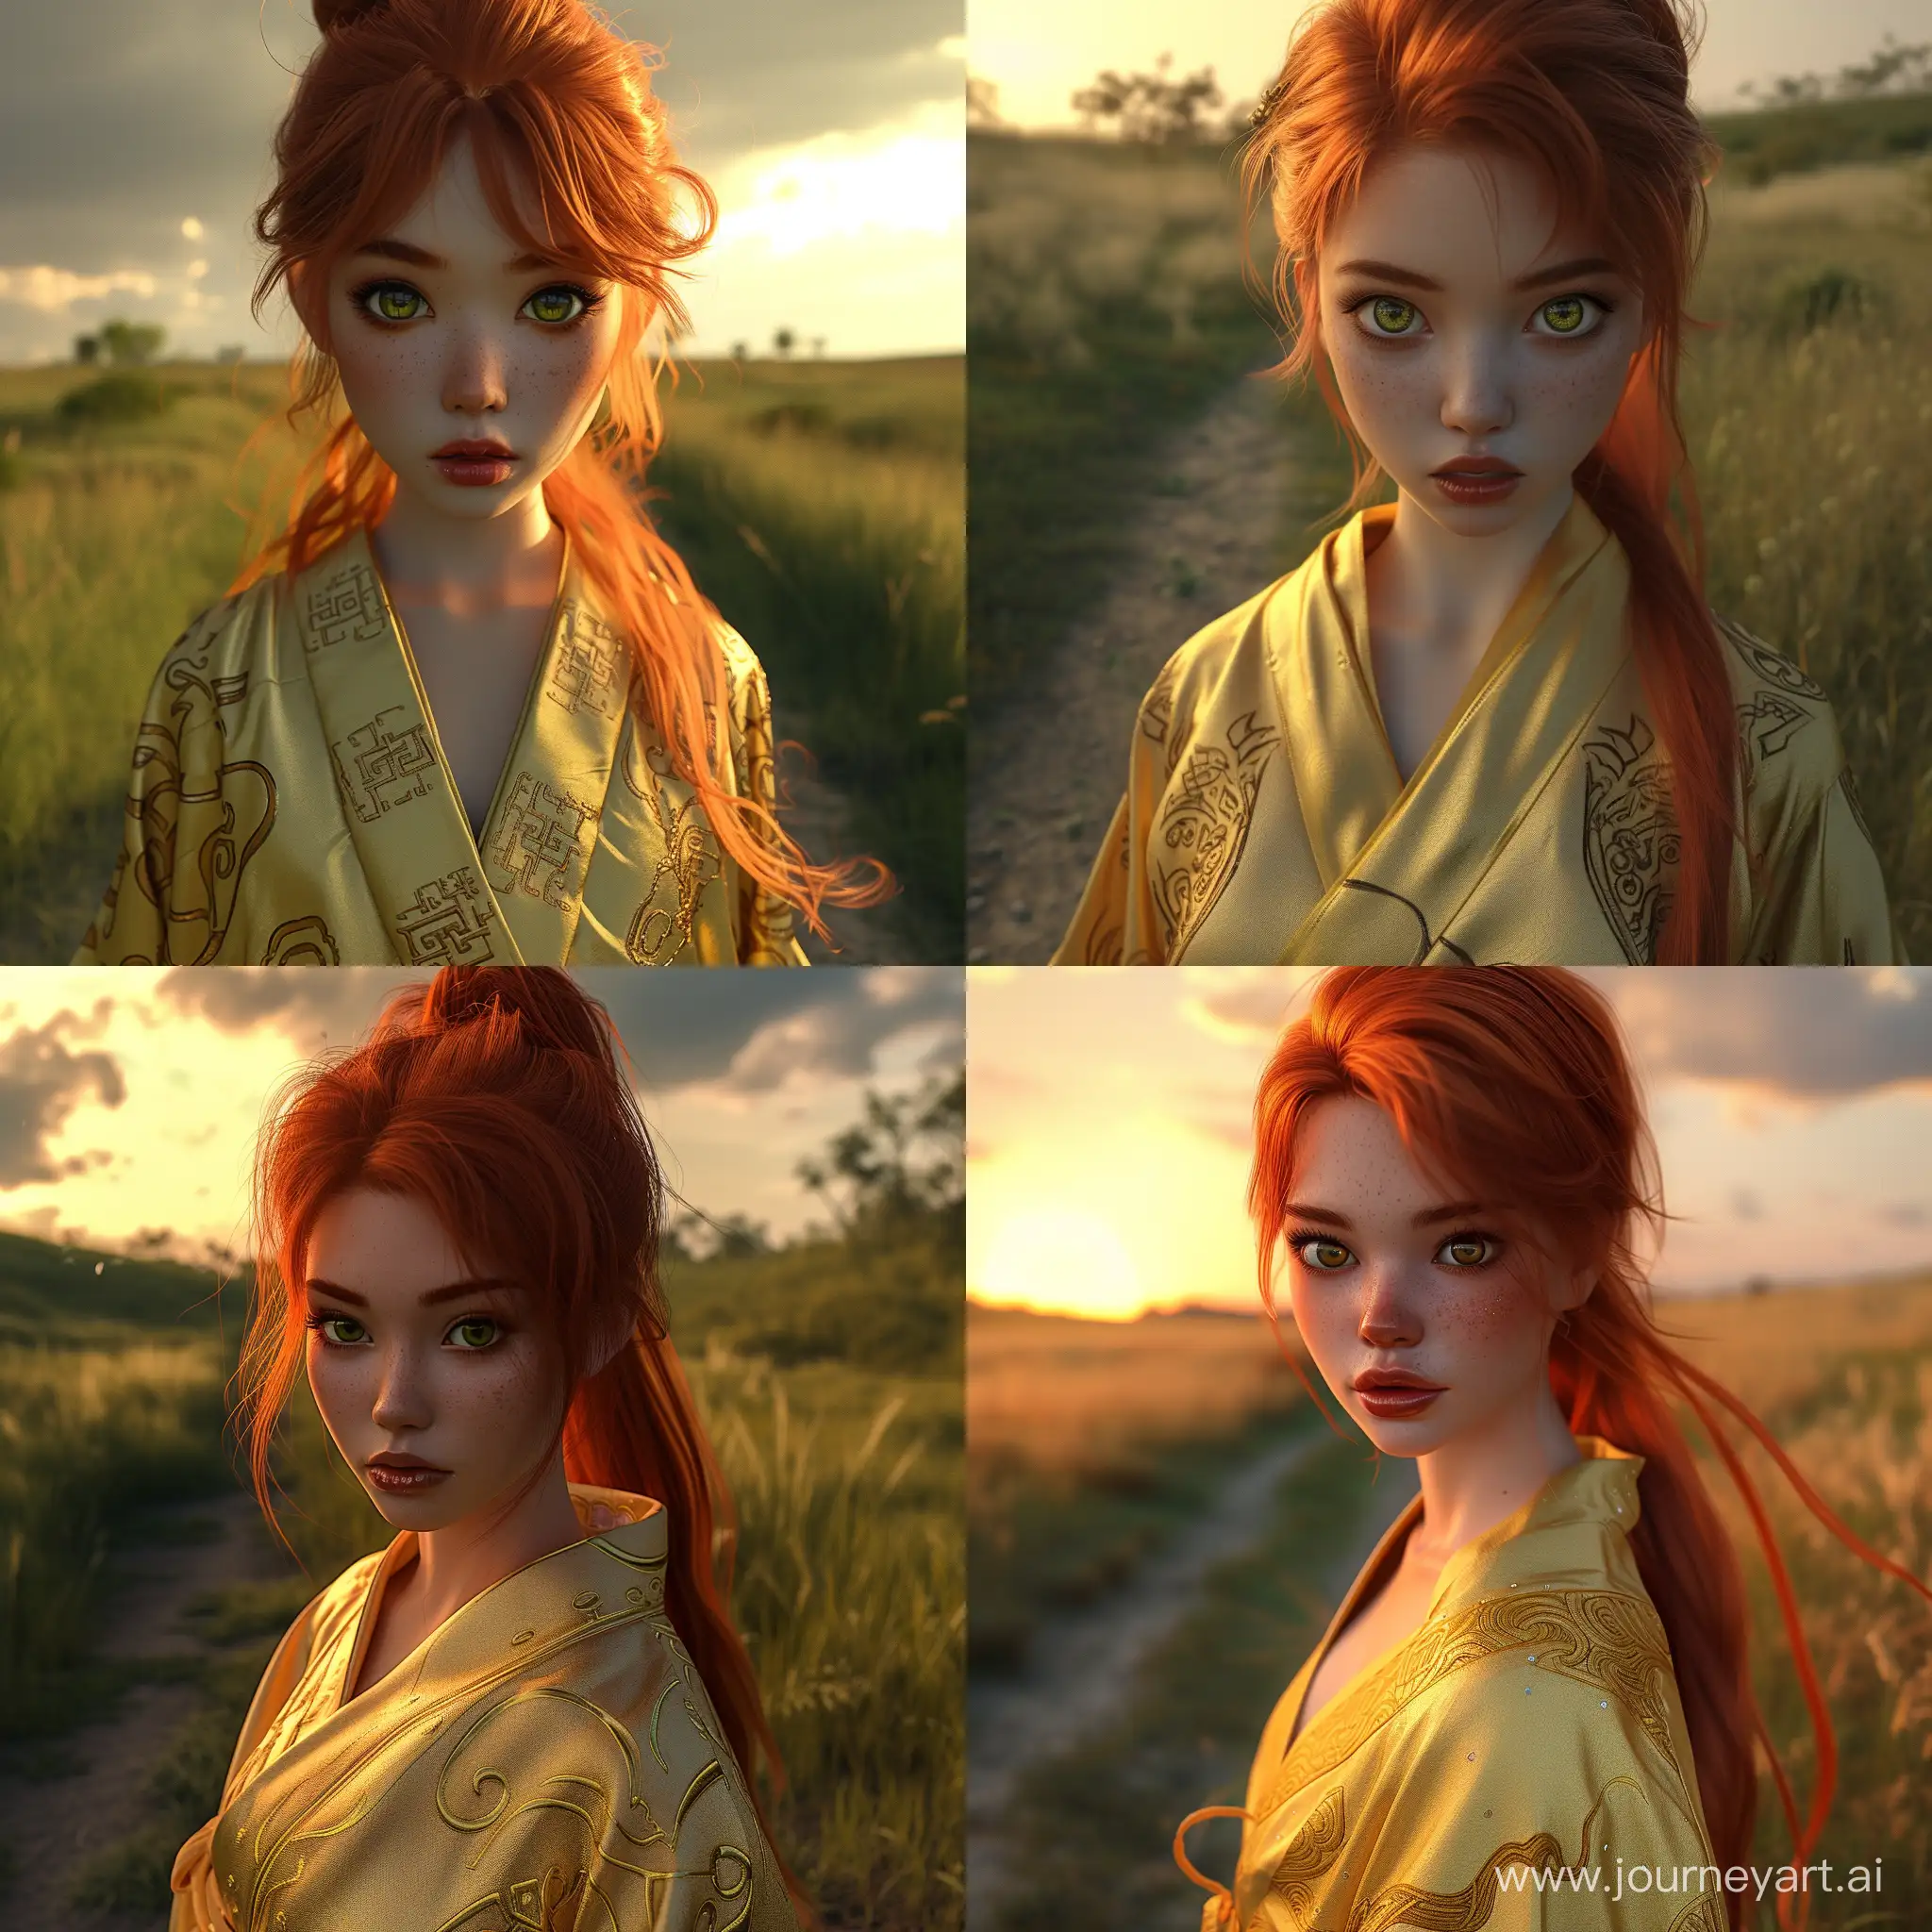 (masterpiece), (extremely intricate:1.3), portrait of a girl, the most beautiful artwork in the world, cinematic lighting, octane render, unreal engine, standing outside aon a dirt path under the gorgeous noon sky with a full sun, volumetrics dtxa portrait photography of a gorgeous red haired Asian woman with beautiful detailed brown colored eyes wearing a silky yellow Asian inspired warriors robe with intricate designs, tan skin, long length beautiful auburn full hair in a ponytail, beautiful detailed brown colored eyes, symmetrical eyes, gorgeous makeup, glossy lips, standing in a grassy field, looking at viewer, attractive, flirting, detailed skin, highly detailed, hyperrealism, cinematic lighting, dark studio, rim lighting, two tone lighting, dimly lit, low key, 8k, ultra high definition, beautiful, amazing, stunning, Asian woman, brown skinned woman, absolutely gorgeous stunning art, best art ever, close-up, very detailed, beautiful large baby doll eyes, vibrant beautiful colors, green eyes